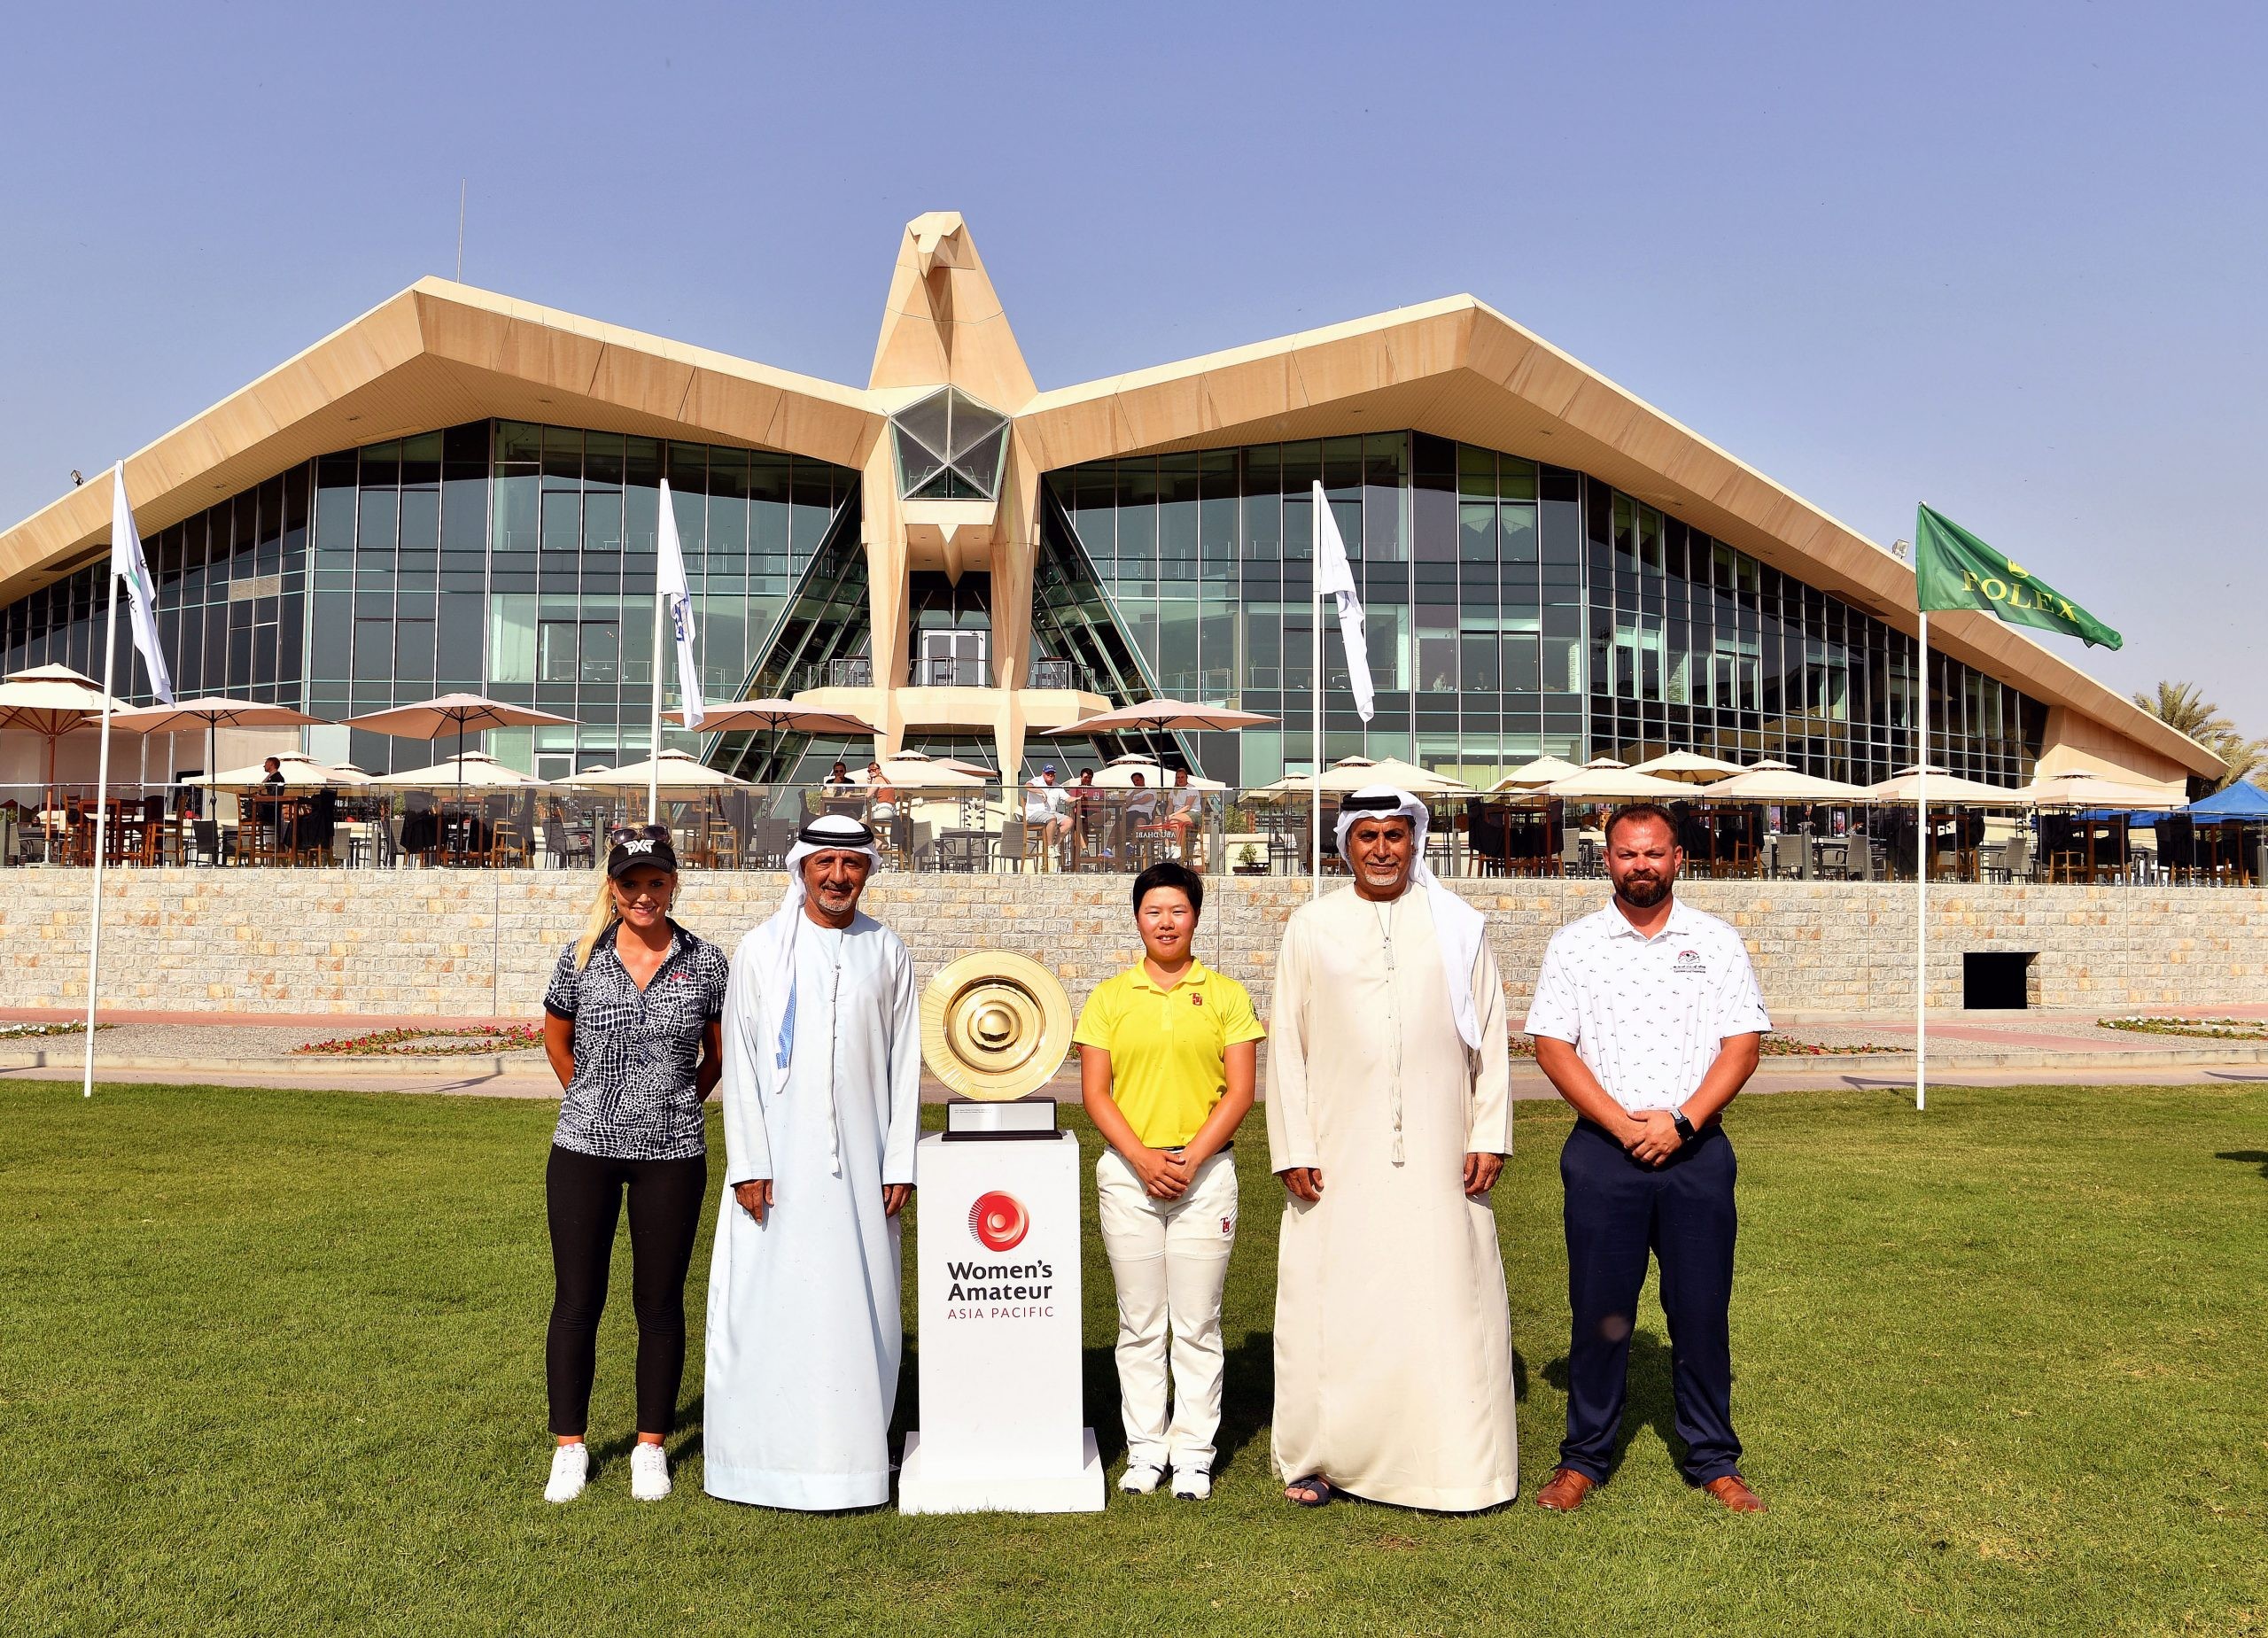 The Emirates Golf Federation hosted both the Asia-Pacific Amateur Championship and the Women’s Amateur Asia-Pacific Championship over the last two weeks.